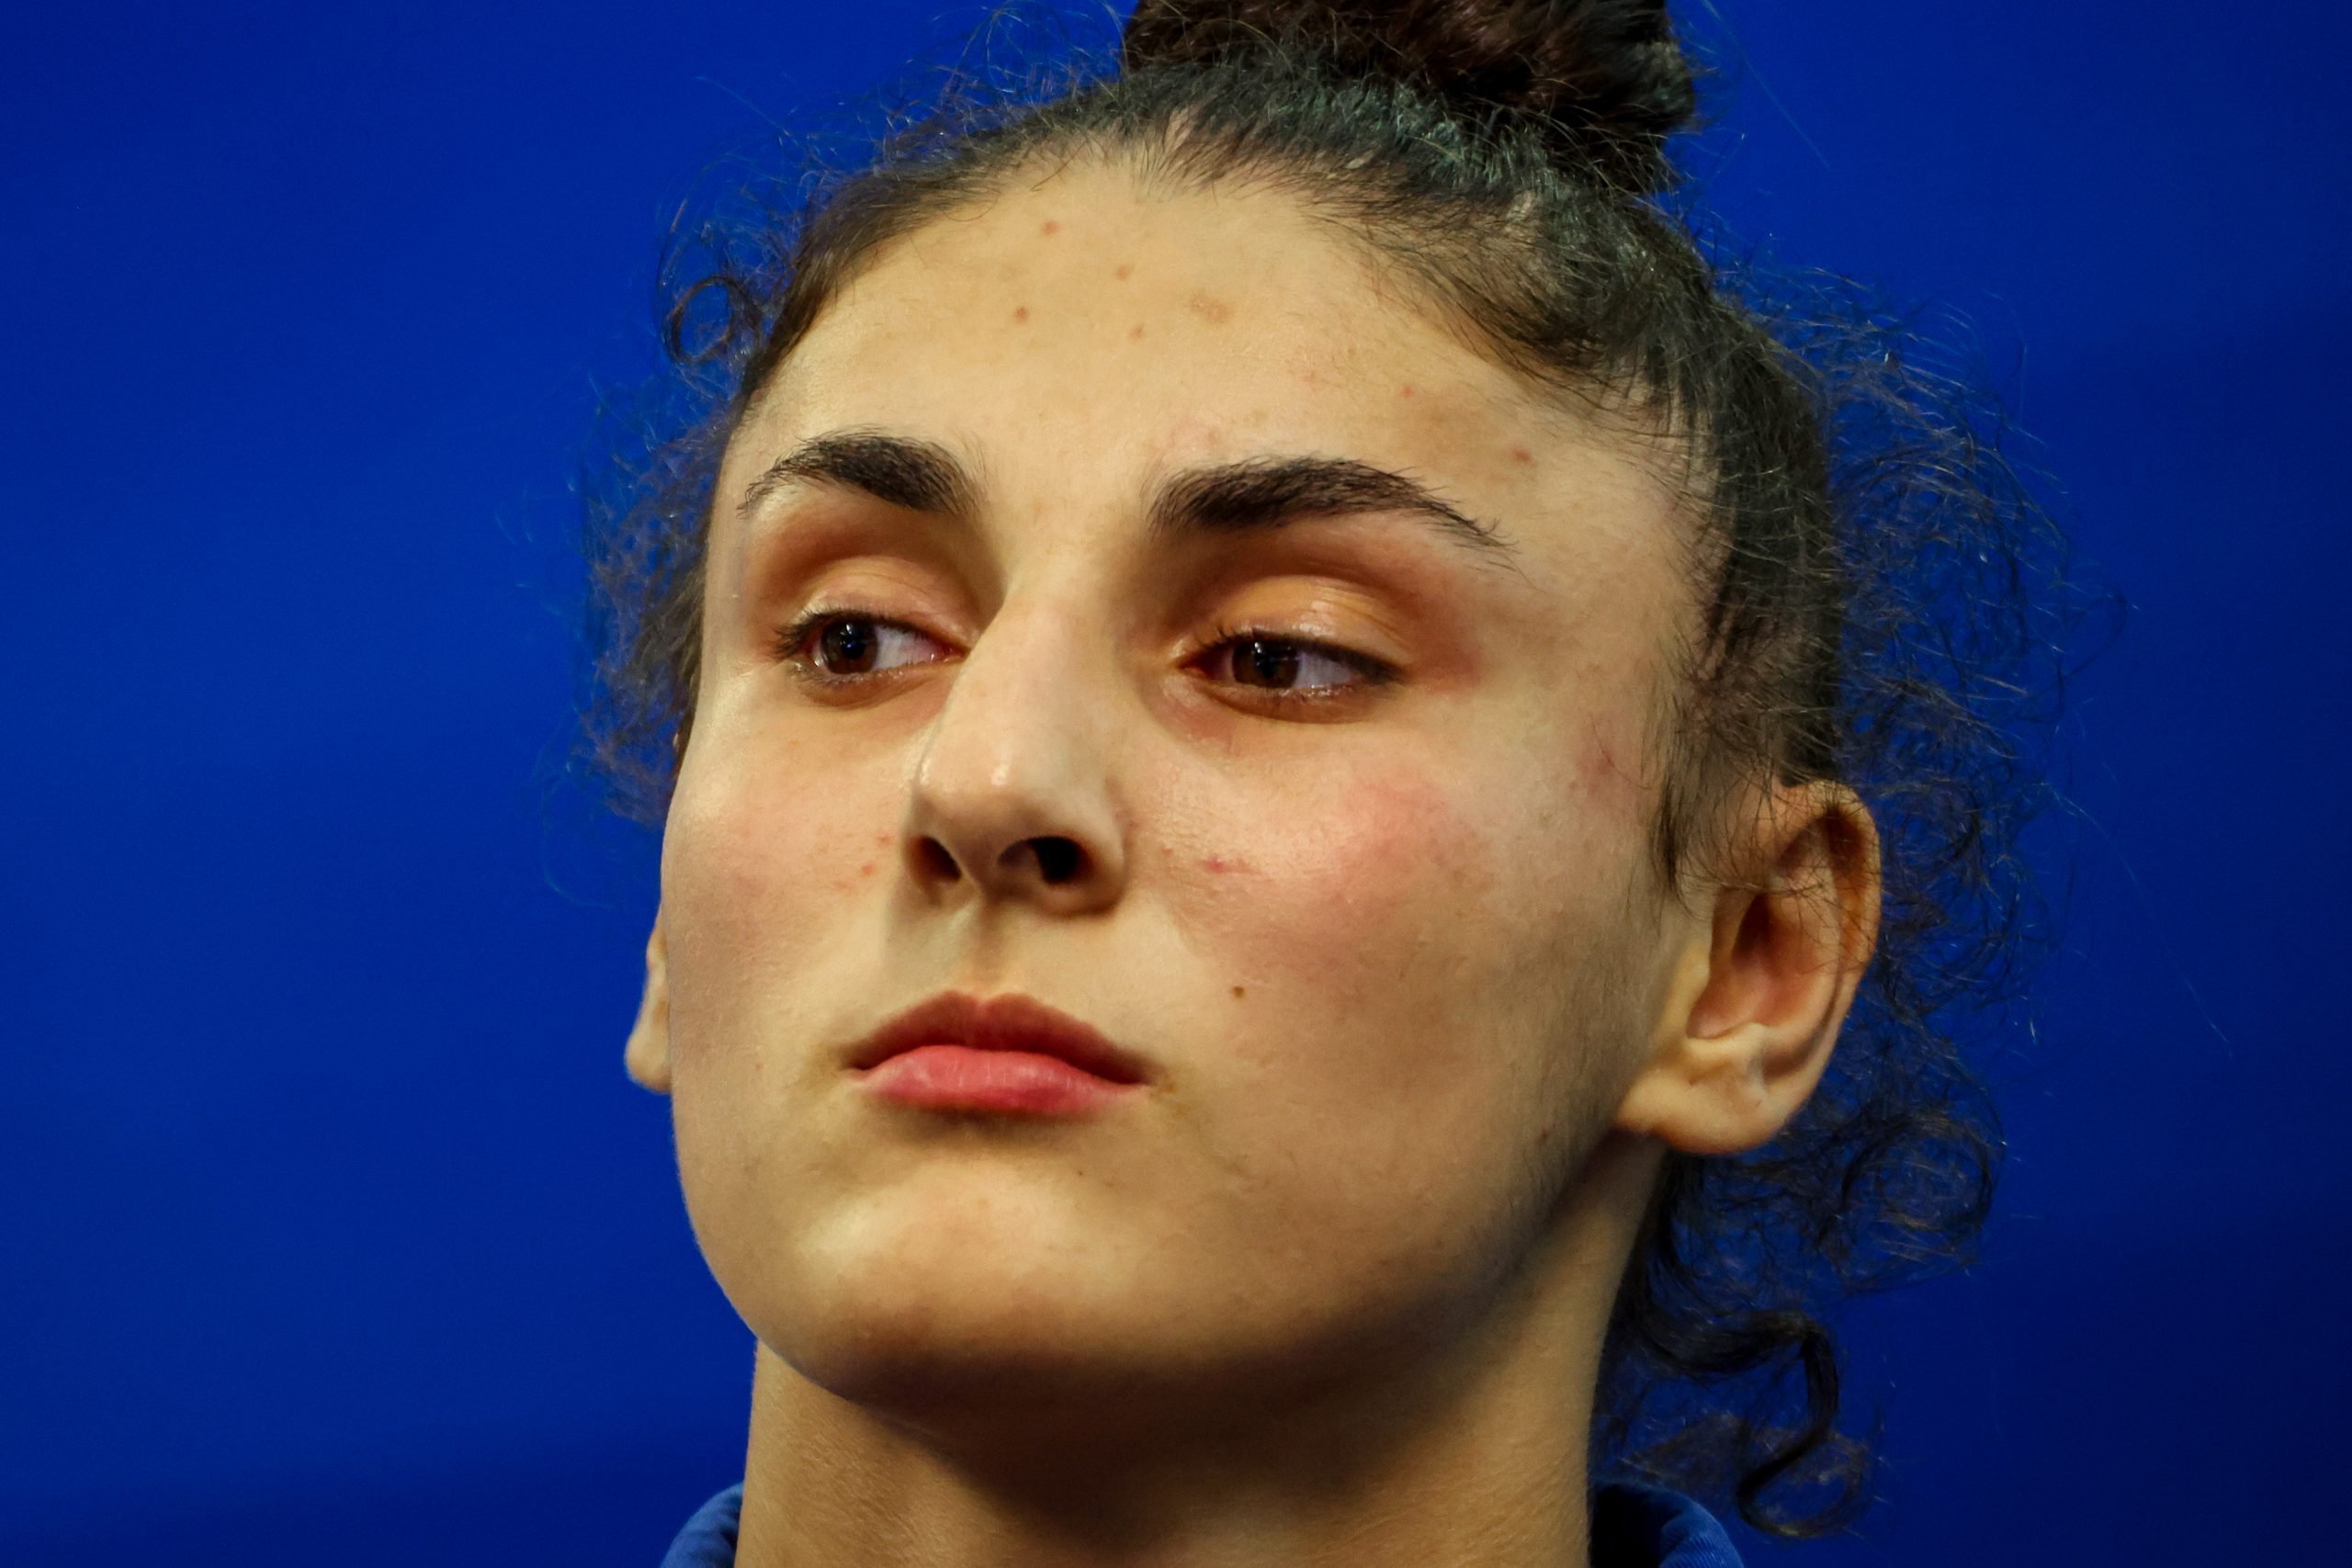 EYES ON THE PRIZE AT THE EUROPEAN YOUTH OLYMPIC FESTIVAL